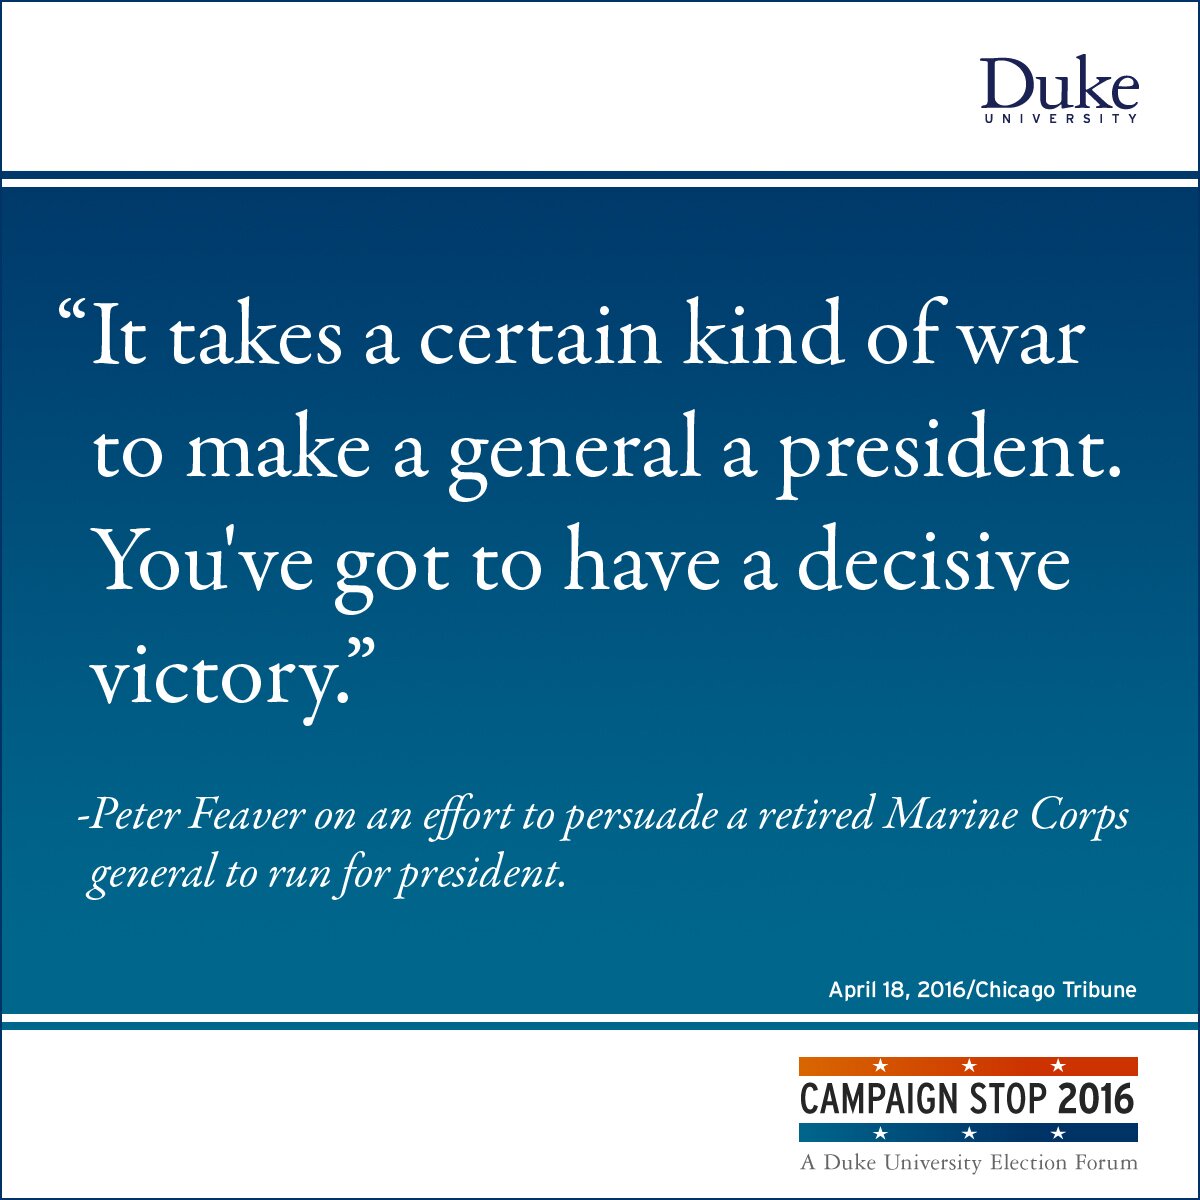 “It takes a certain kind of war to make a general a president. You